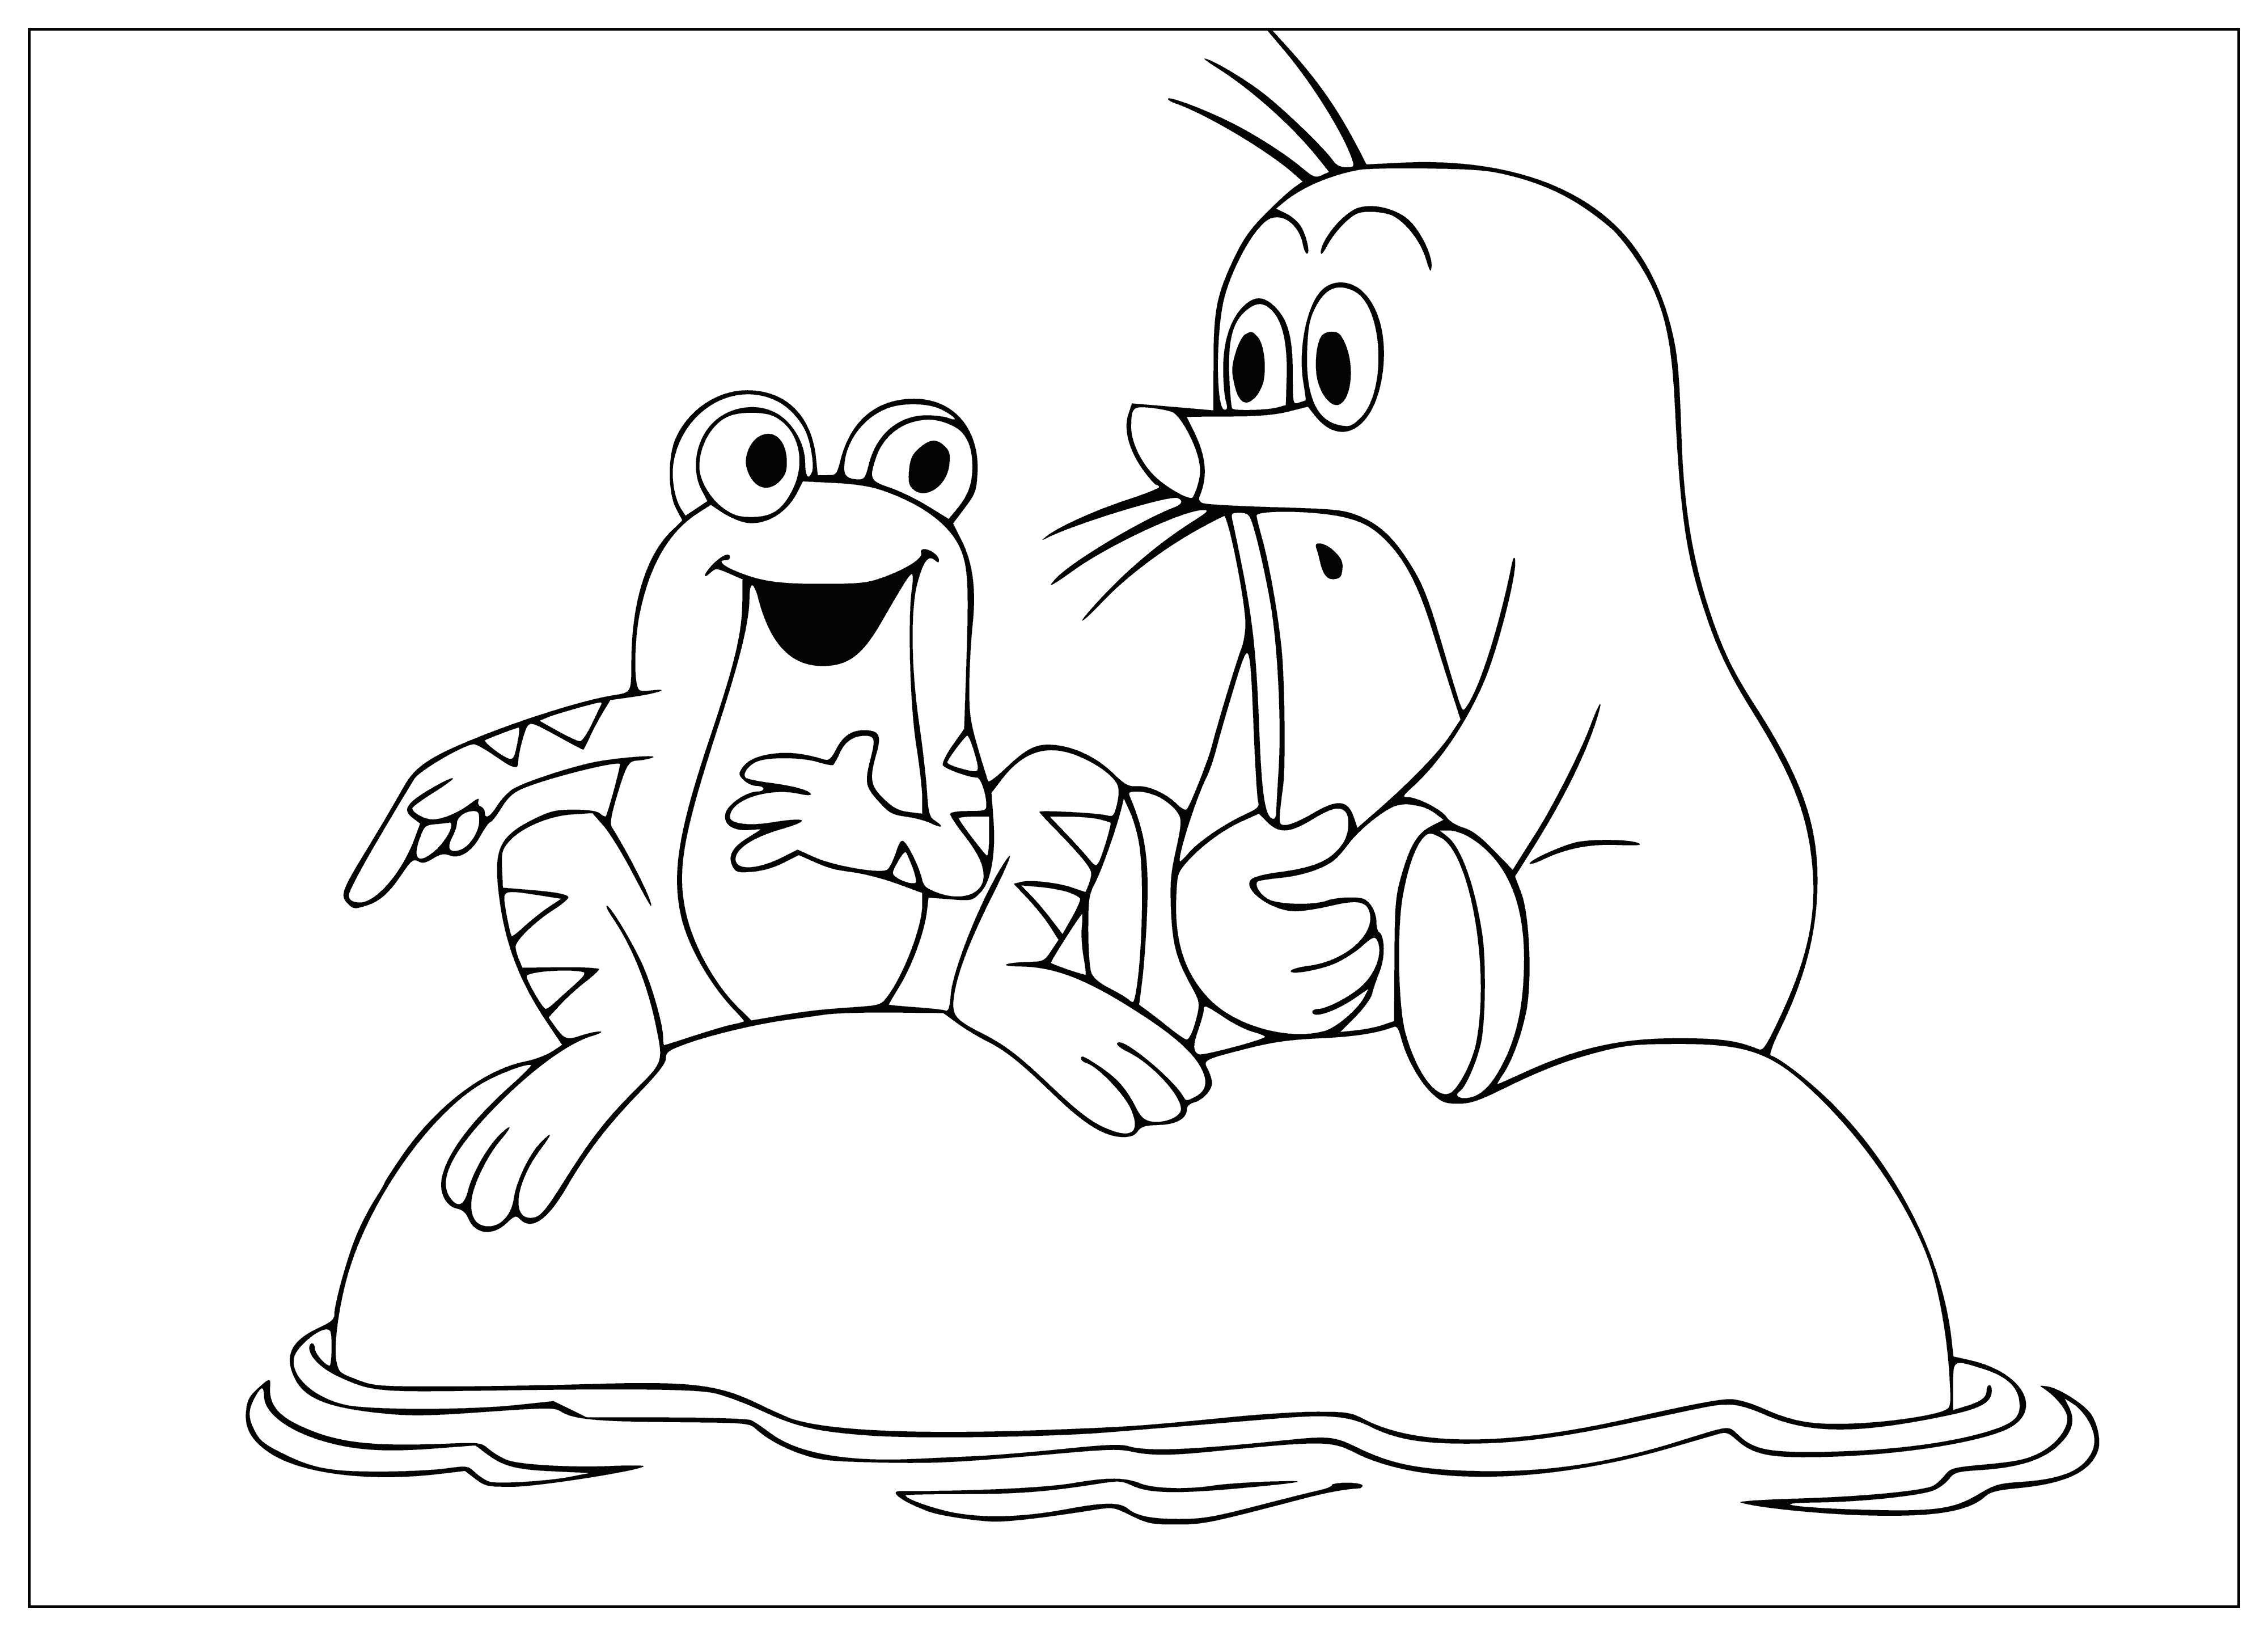 coloring page: Frog and mole sit on a lily pad; the frog gazes at the sky, the mole at the frog.